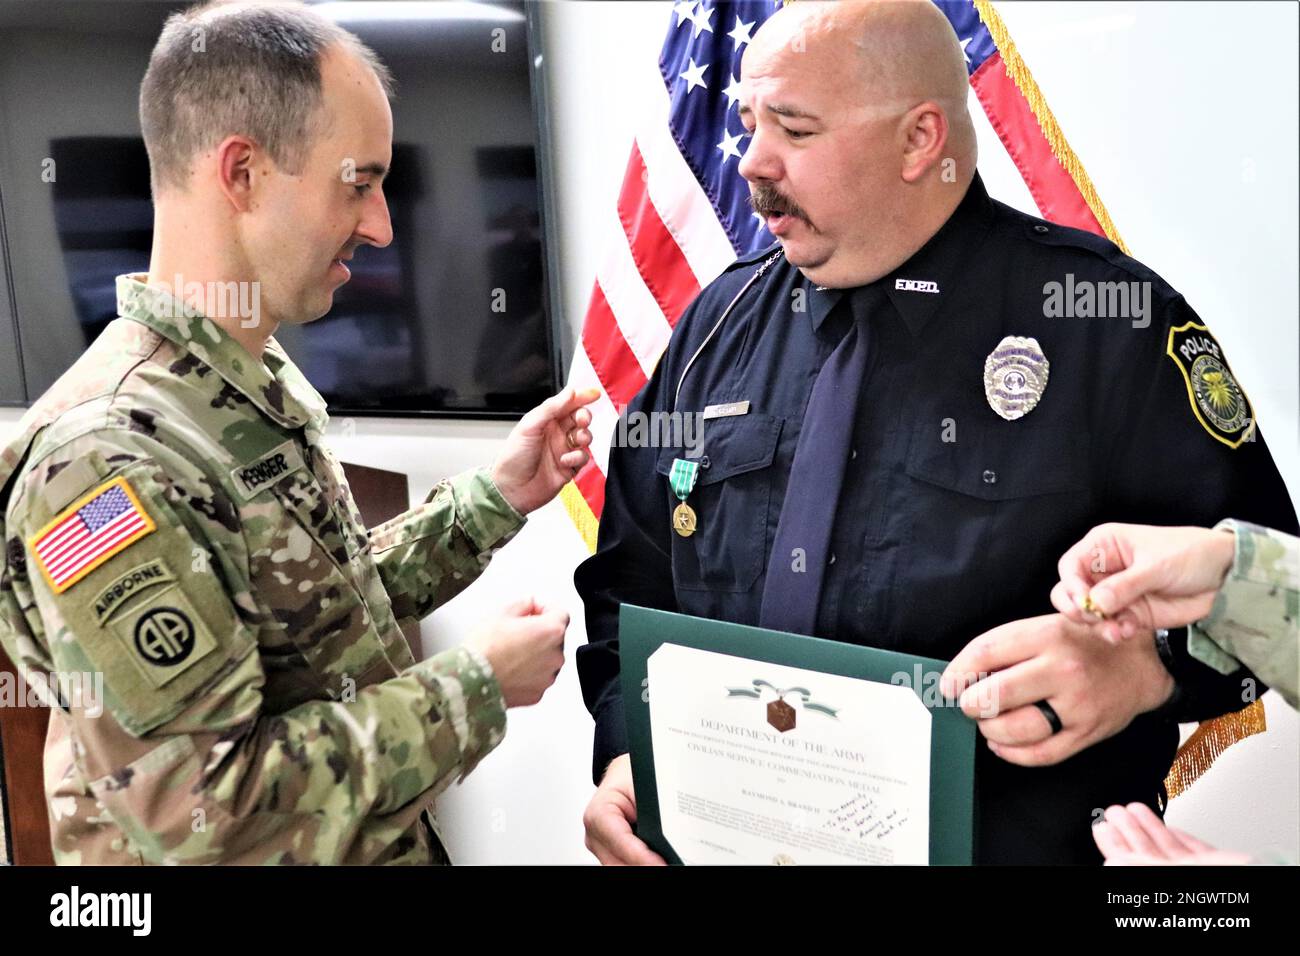 Police Officer Raymond A. Brand II receives the Department of the Army Civilian Service Commendation Medal for “exceptional service and performance” Nov. 29, 2022, at Fort McCoy, Wis., from Fort McCoy Garrison Commander Col. Stephen Messenger due to “heroic” efforts to rescue two people in a vehicle accident in February 2022 in Sparta, Wis. The ceremony was held at the Fort McCoy Directorate of Emergency Services headquarters with both firefighters and police officers in attendance as well as Brand’s wife Jennifer, and Command Sgt. Maj. Raquel DiDomenico, Fort McCoy Garrison command sergeant m Stock Photo